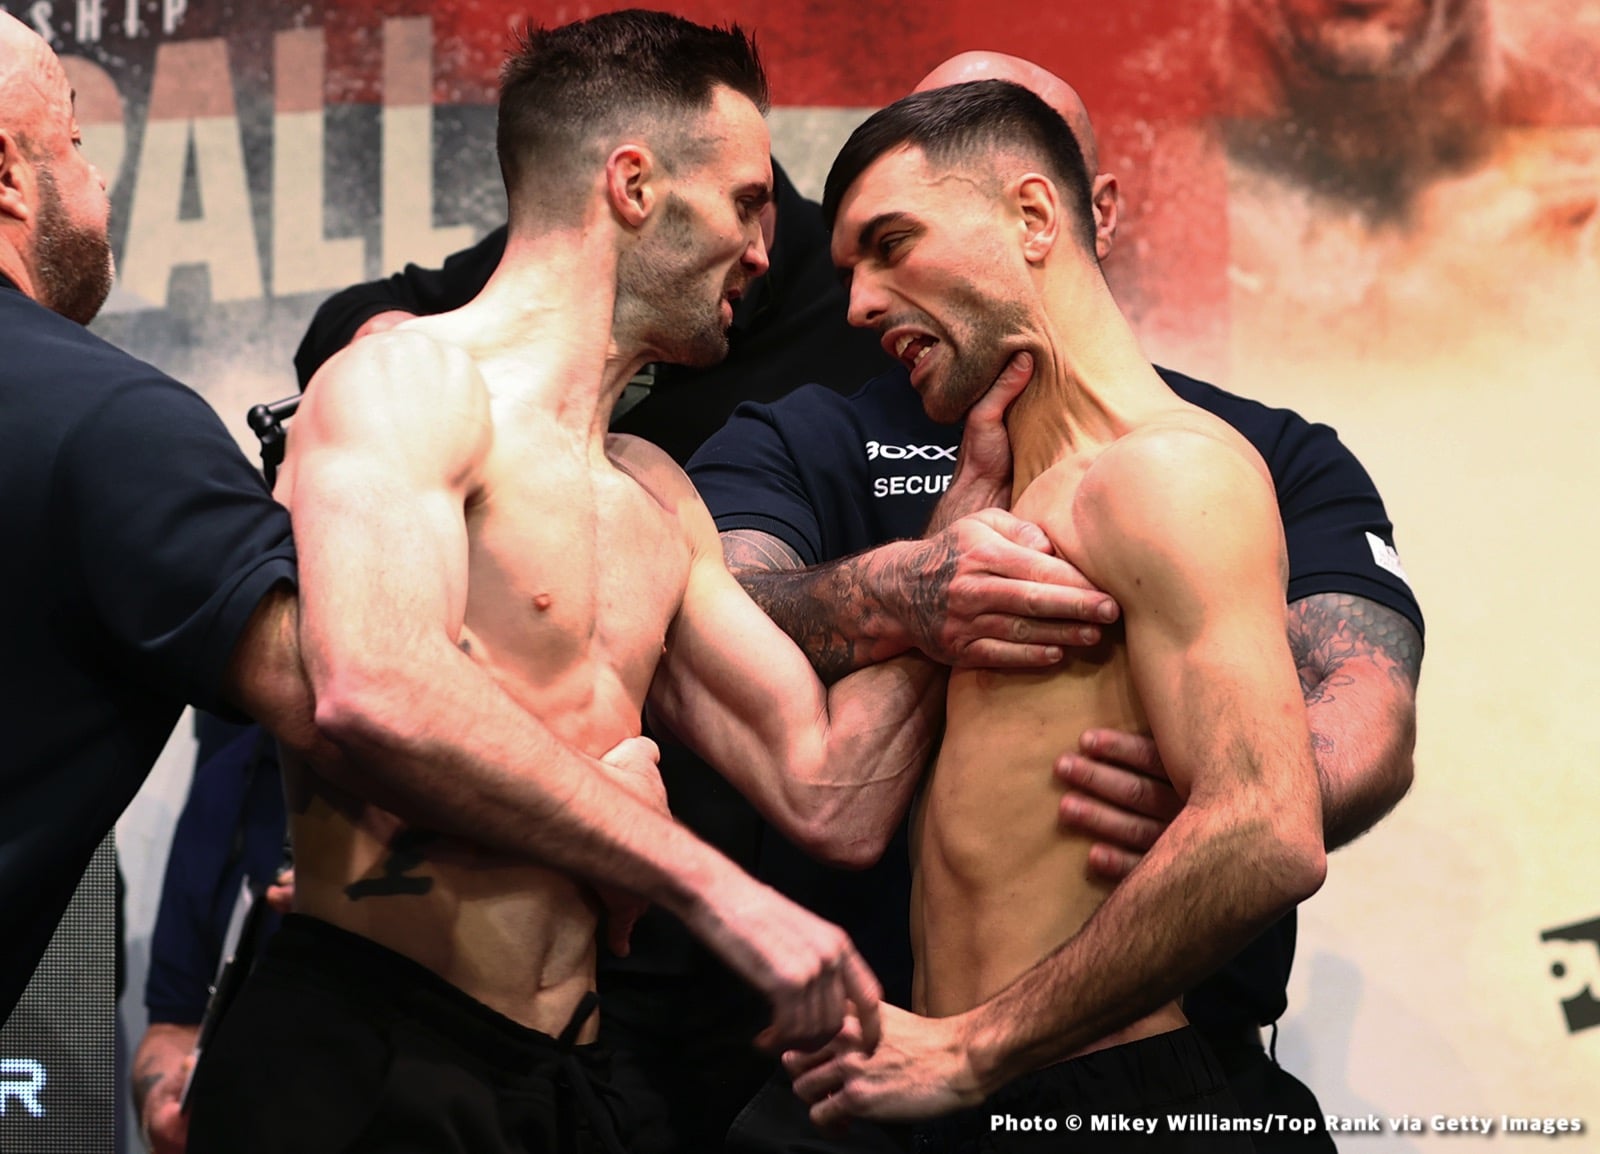 ack Catterall, Josh Taylor boxing image / photo